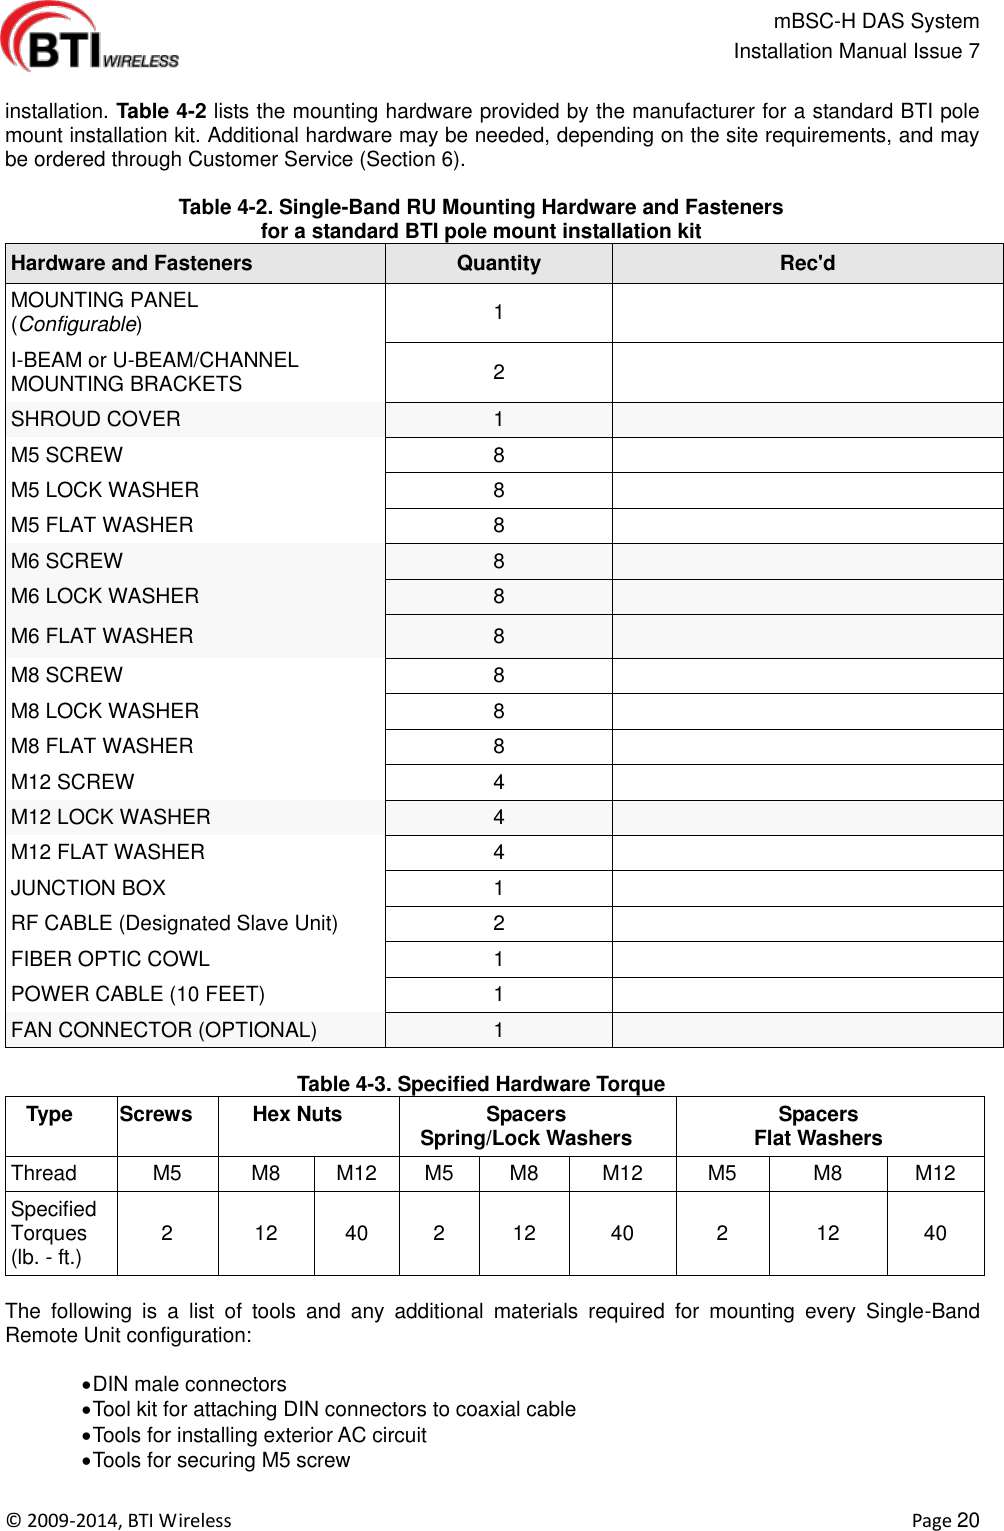                                                   mBSC-H DAS System   Installation Manual Issue 7  ©  2009-2014, BTI Wireless    Page 20  installation. Table 4-2 lists the mounting hardware provided by the manufacturer for a standard BTI pole mount installation kit. Additional hardware may be needed, depending on the site requirements, and may be ordered through Customer Service (Section 6).  Table 4-2. Single-Band RU Mounting Hardware and Fasteners   for a standard BTI pole mount installation kit Hardware and Fasteners Quantity Rec&apos;d MOUNTING PANEL   (Configurable) 1    I-BEAM or U-BEAM/CHANNEL MOUNTING BRACKETS 2  SHROUD COVER 1  M5 SCREW 8  M5 LOCK WASHER 8  M5 FLAT WASHER 8  M6 SCREW 8  M6 LOCK WASHER 8  M6 FLAT WASHER 8  M8 SCREW 8  M8 LOCK WASHER 8  M8 FLAT WASHER 8  M12 SCREW 4  M12 LOCK WASHER 4  M12 FLAT WASHER 4  JUNCTION BOX 1  RF CABLE (Designated Slave Unit) 2  FIBER OPTIC COWL 1  POWER CABLE (10 FEET) 1  FAN CONNECTOR (OPTIONAL) 1   Table 4-3. Specified Hardware Torque Type Screws Hex Nuts Spacers Spring/Lock Washers Spacers Flat Washers Thread M5 M8 M12 M5 M8 M12 M5 M8 M12 Specified Torques (lb. - ft.) 2 12 40 2 12 40 2 12 40  The  following  is  a  list  of  tools  and  any  additional  materials  required  for  mounting  every  Single-Band Remote Unit configuration:   DIN male connectors  Tool kit for attaching DIN connectors to coaxial cable  Tools for installing exterior AC circuit  Tools for securing M5 screw 